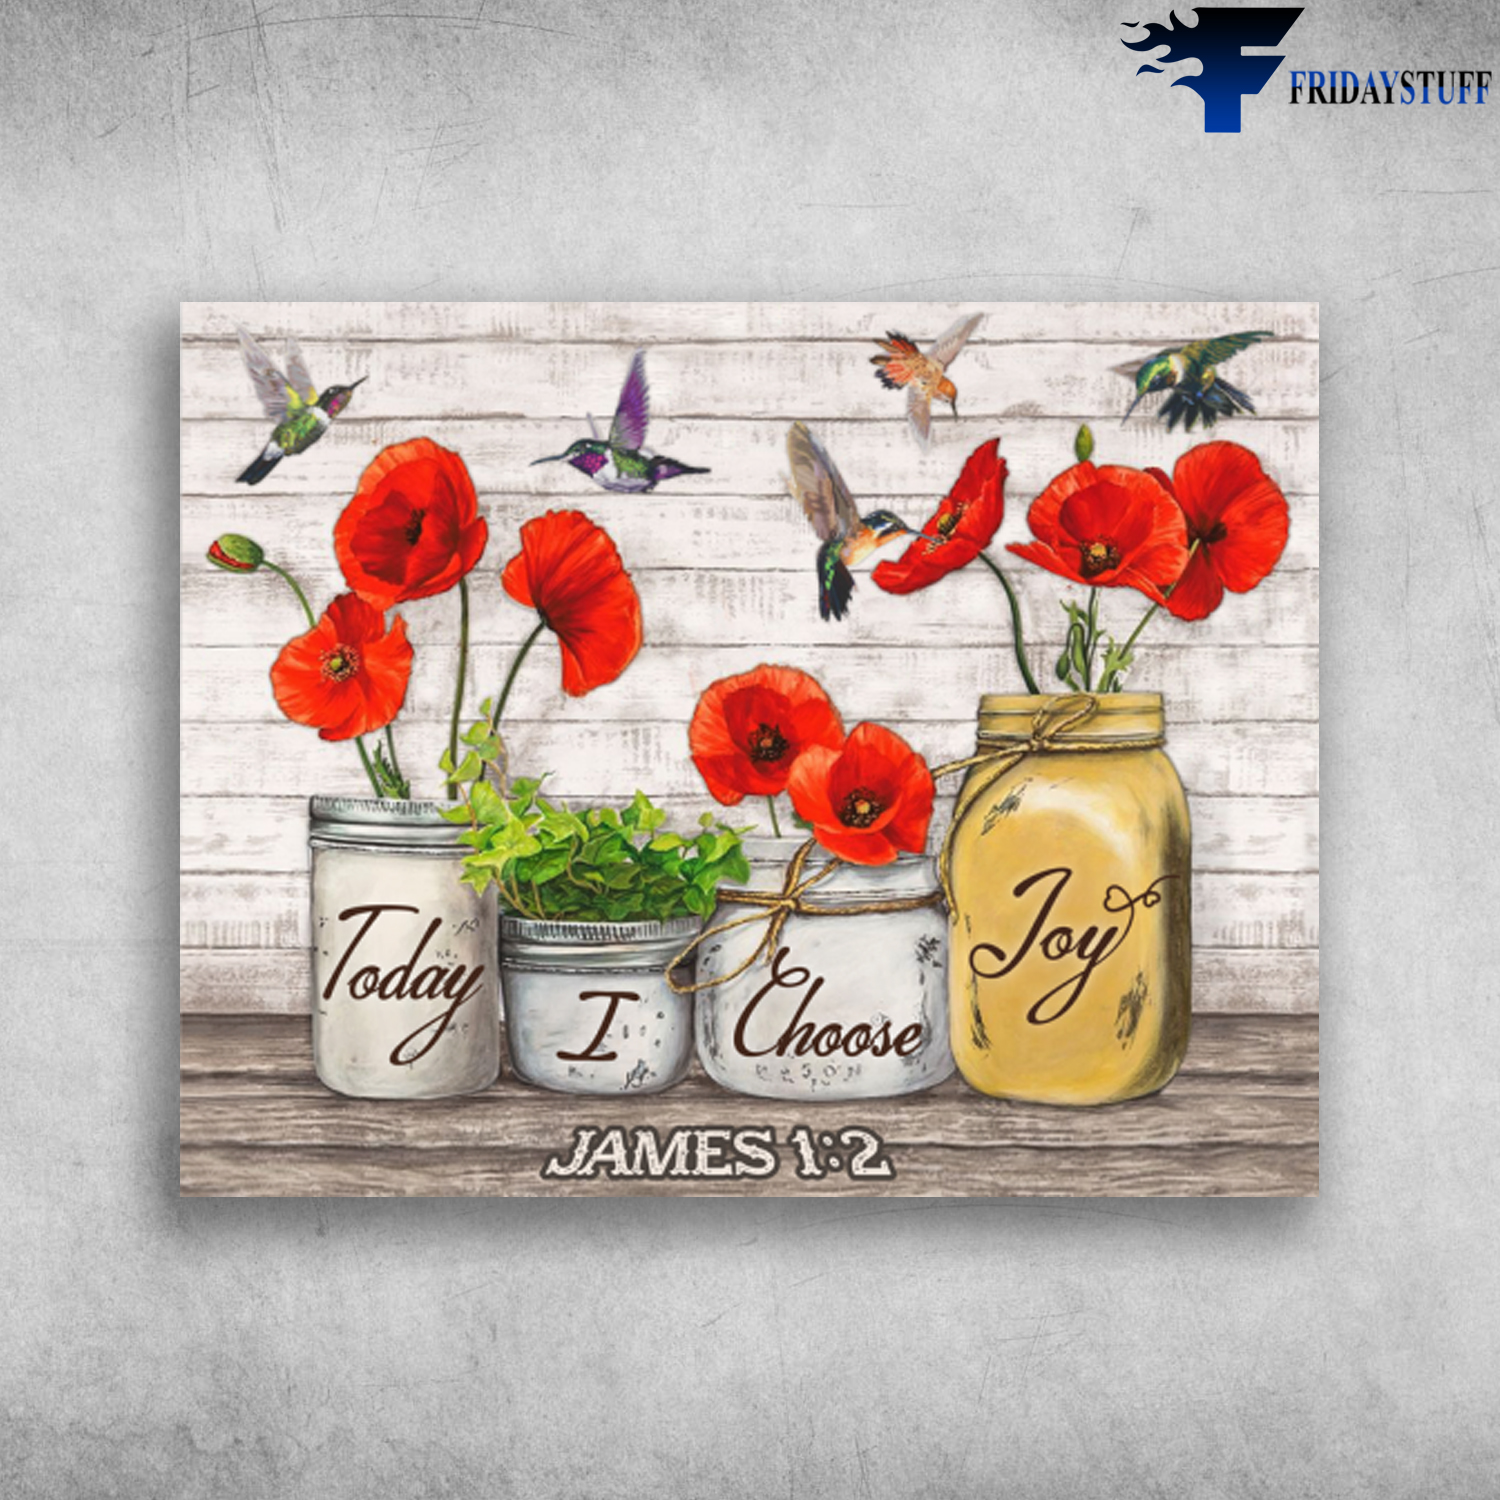 Cardinal Birds With Red Poppies Flower Today I Choose Joy James 1 2